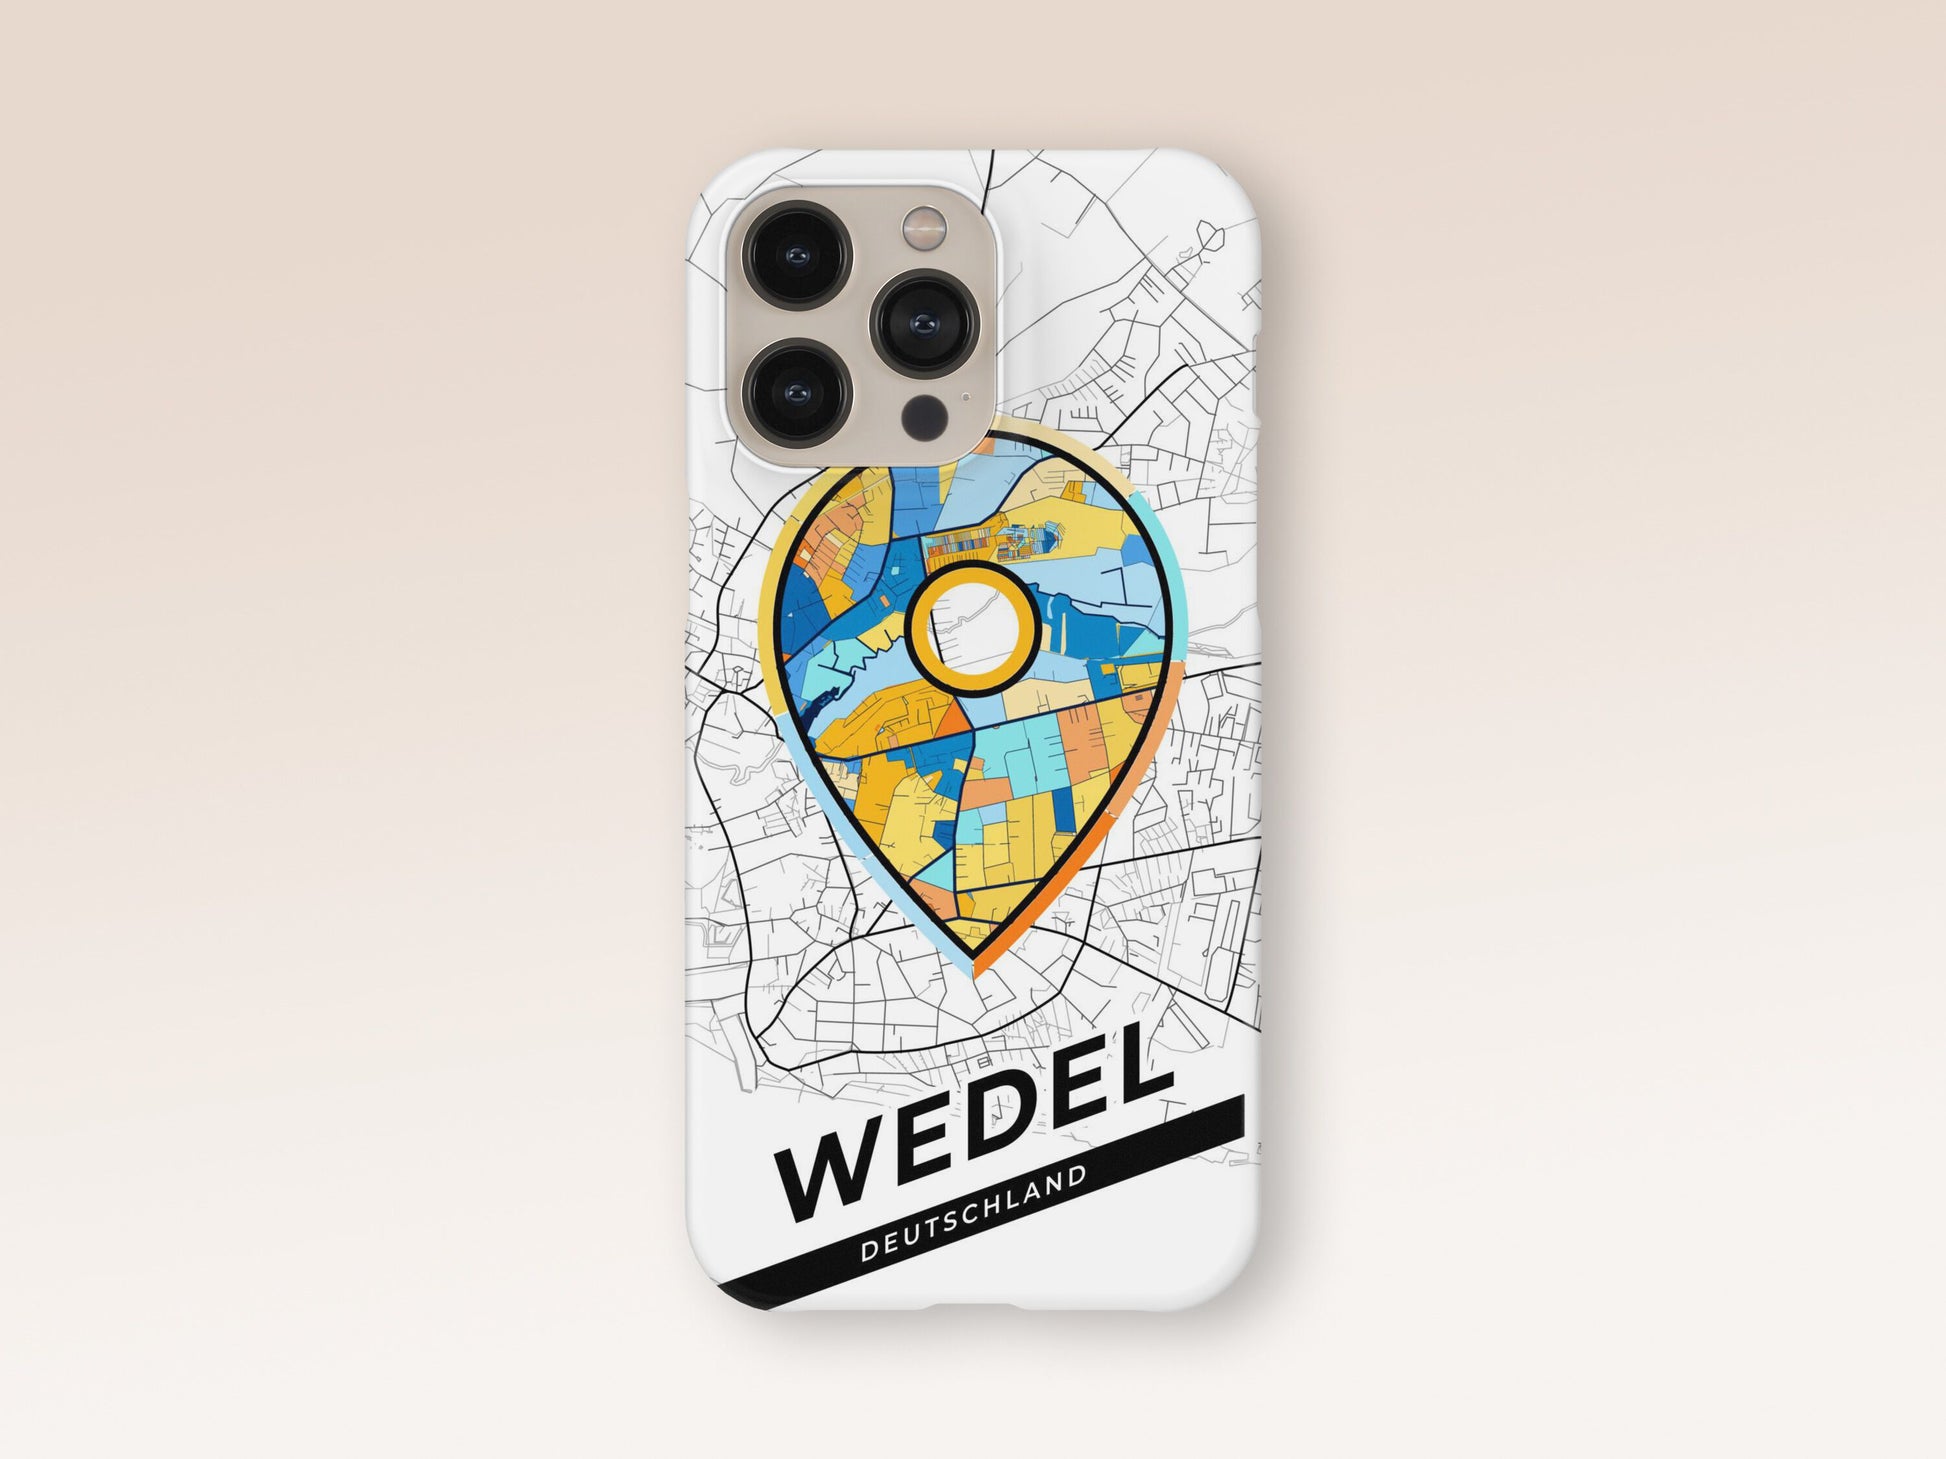 Wedel Deutschland slim phone case with colorful icon 1